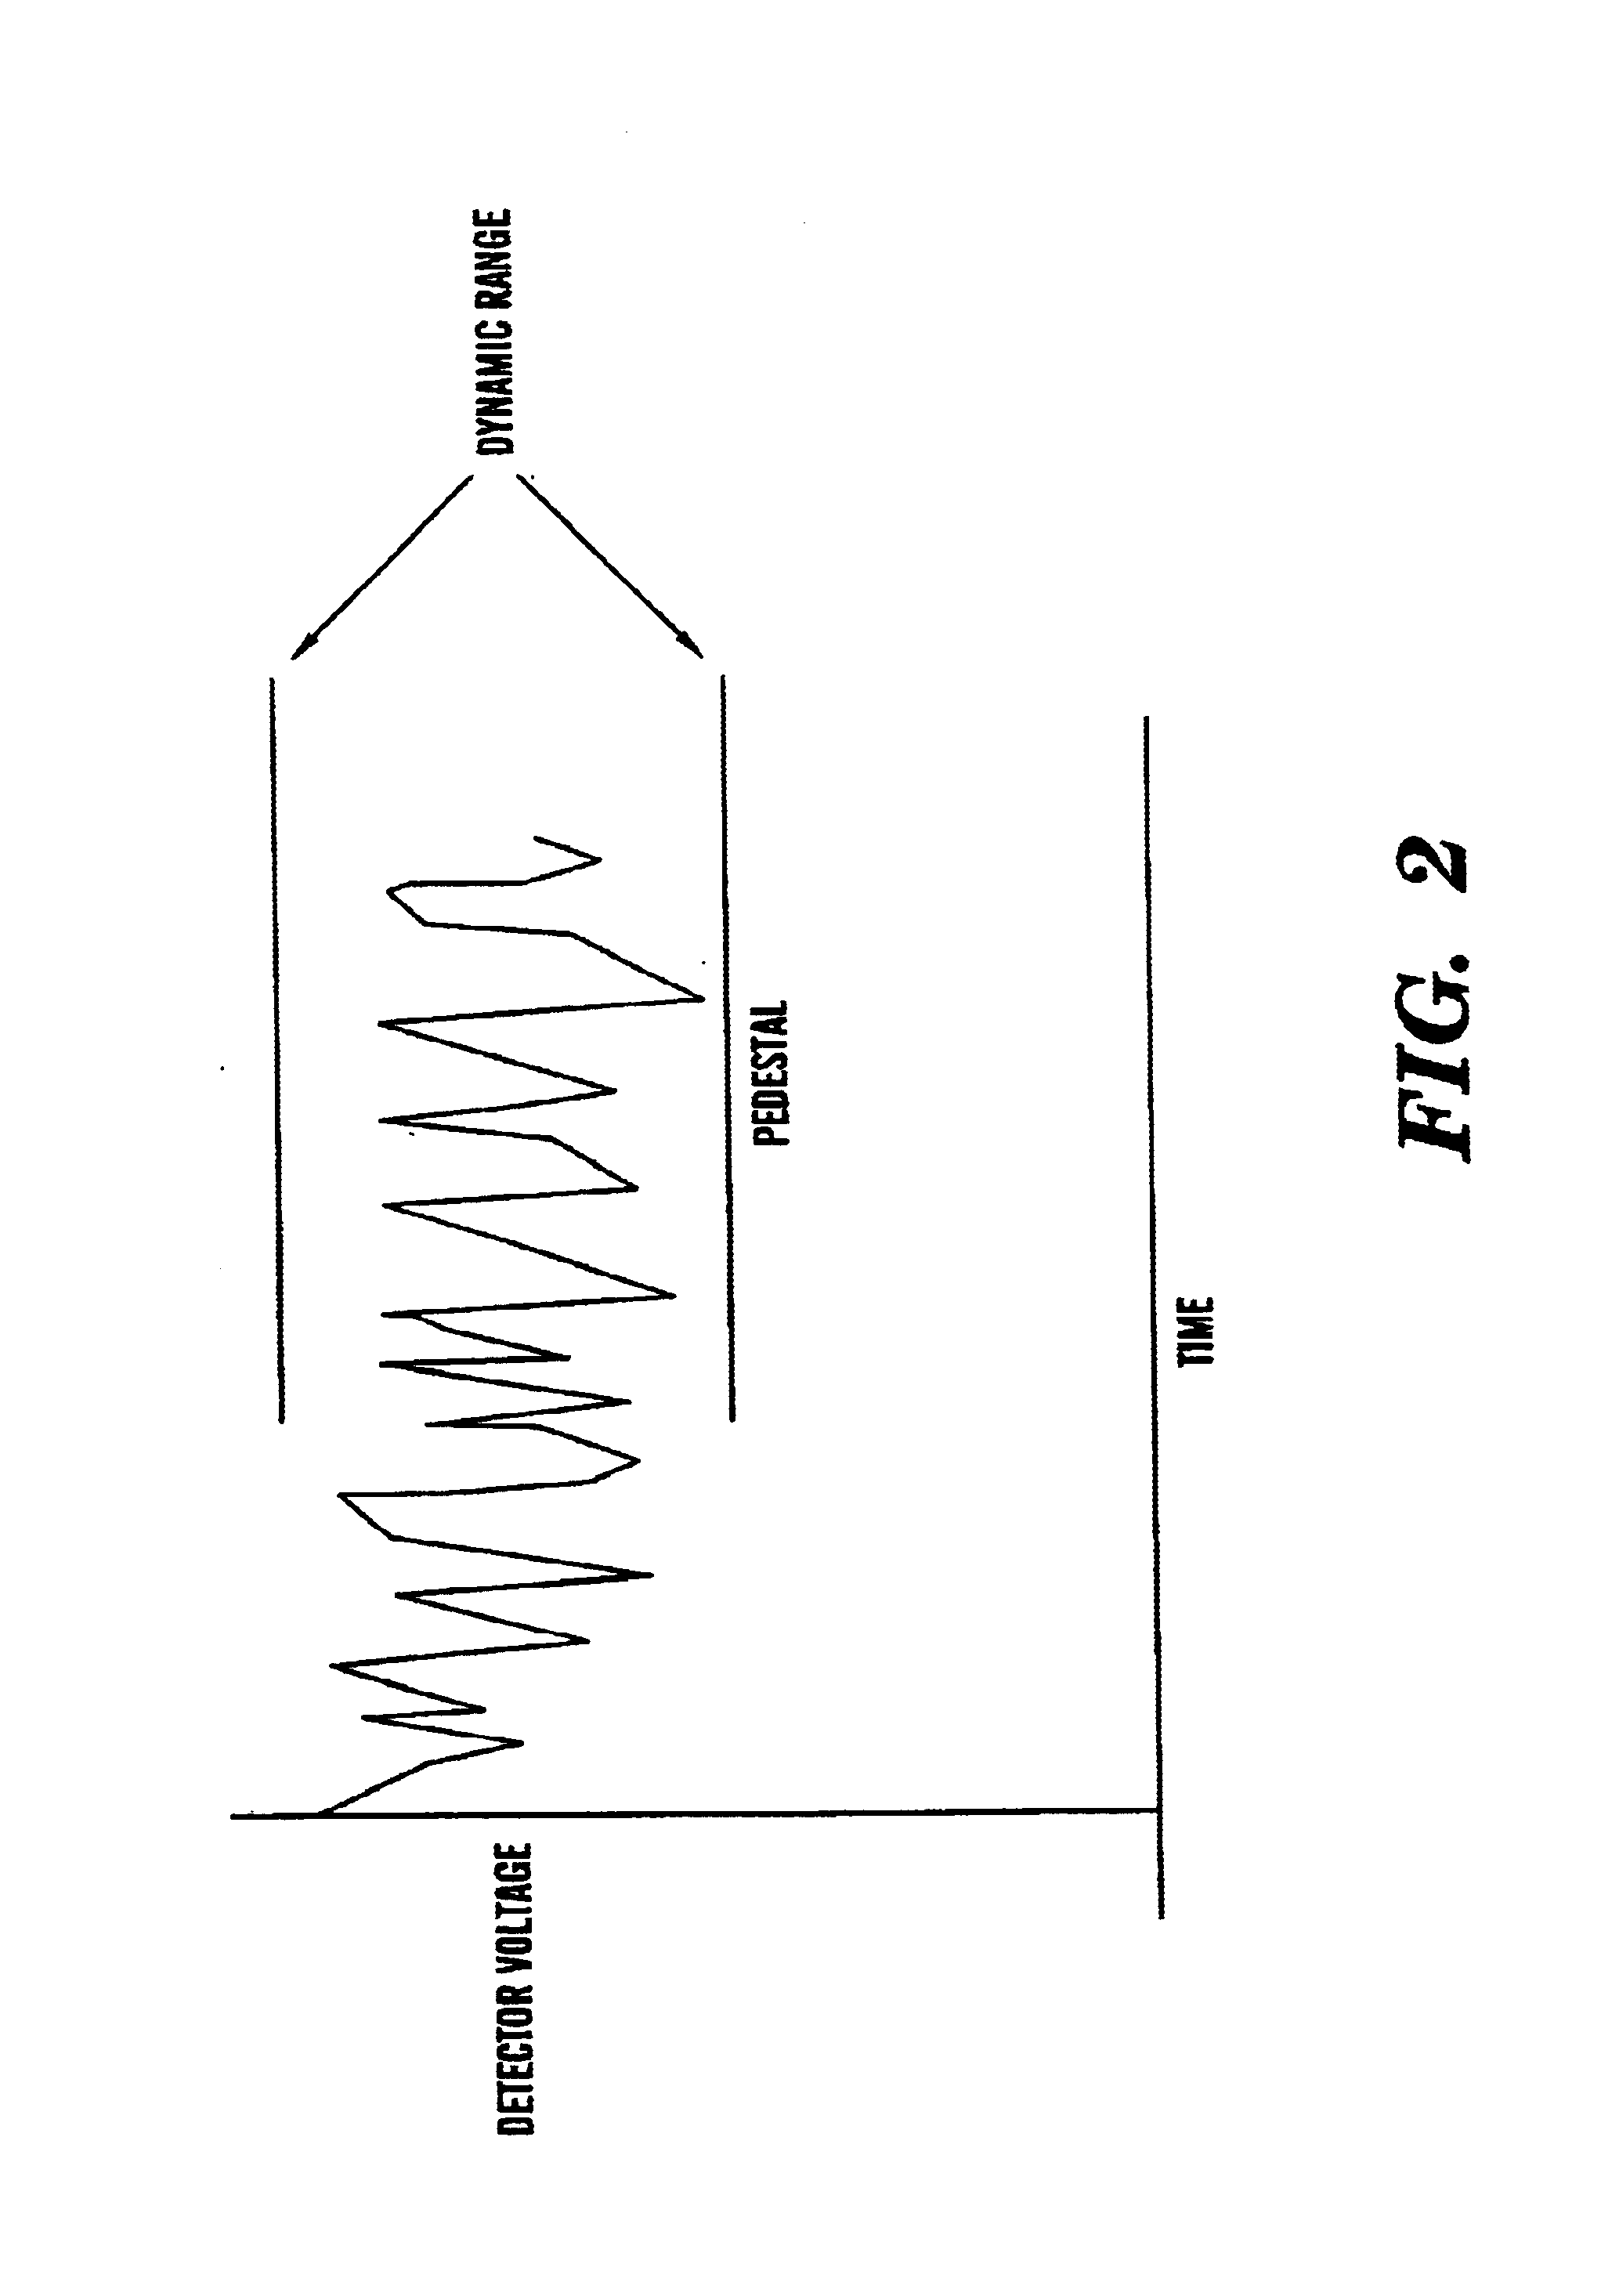 Method and apparatus for correction of microbolometer output